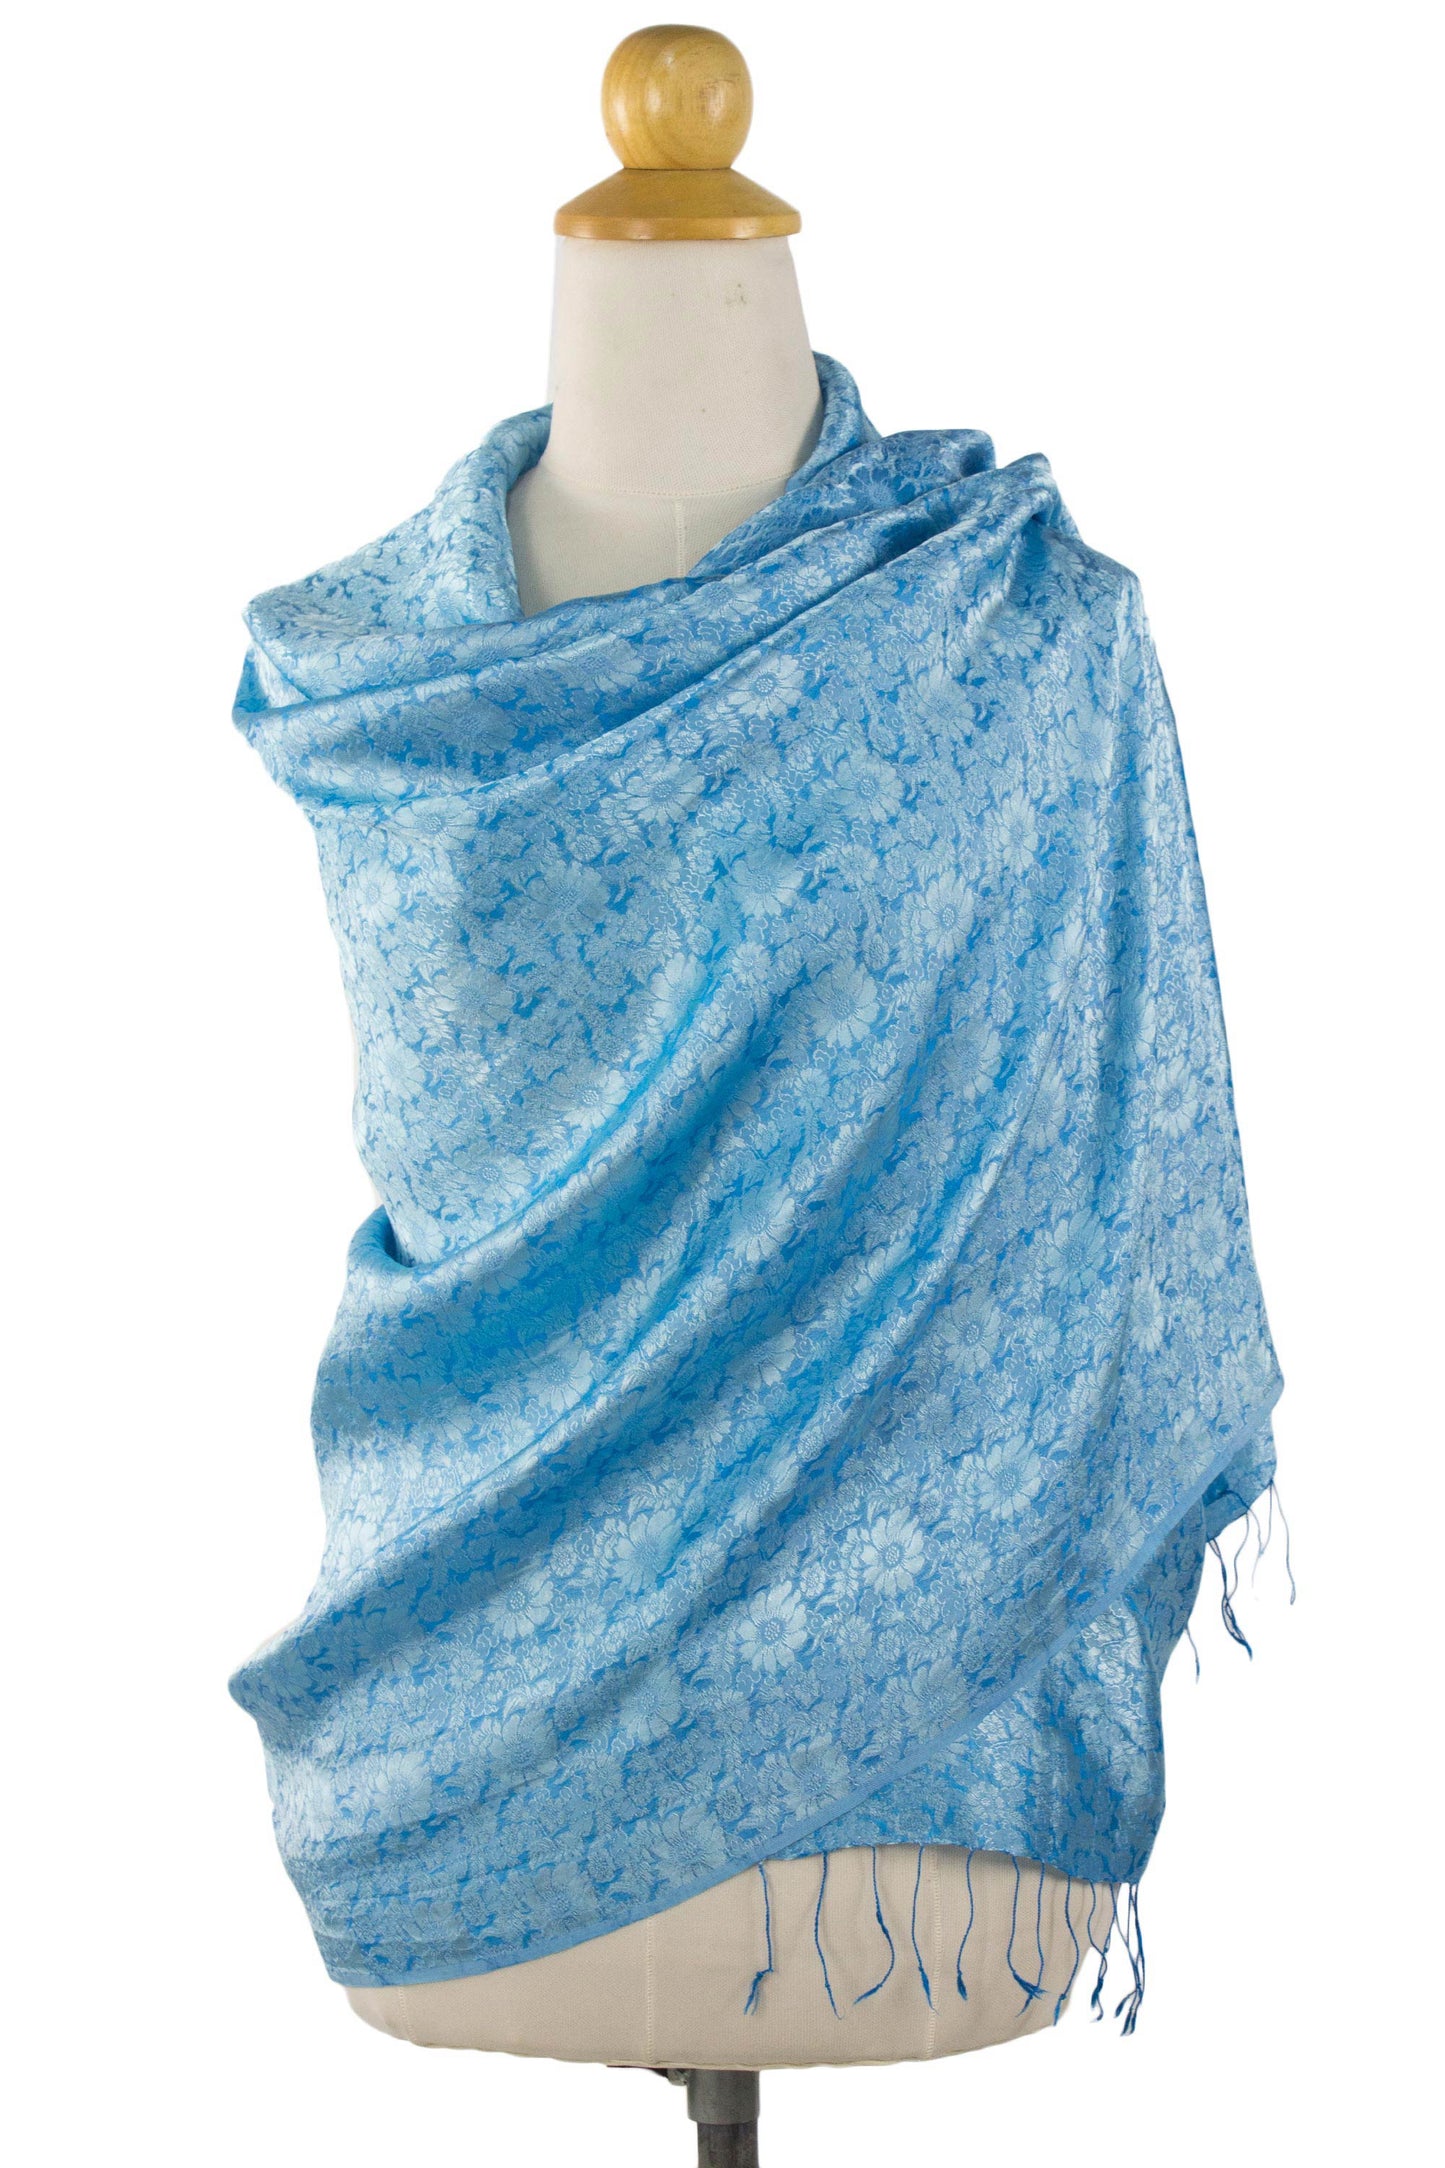 Mandarin Sky Artisan Crafted Blue Rayon Blend Shawl with Floral Motif